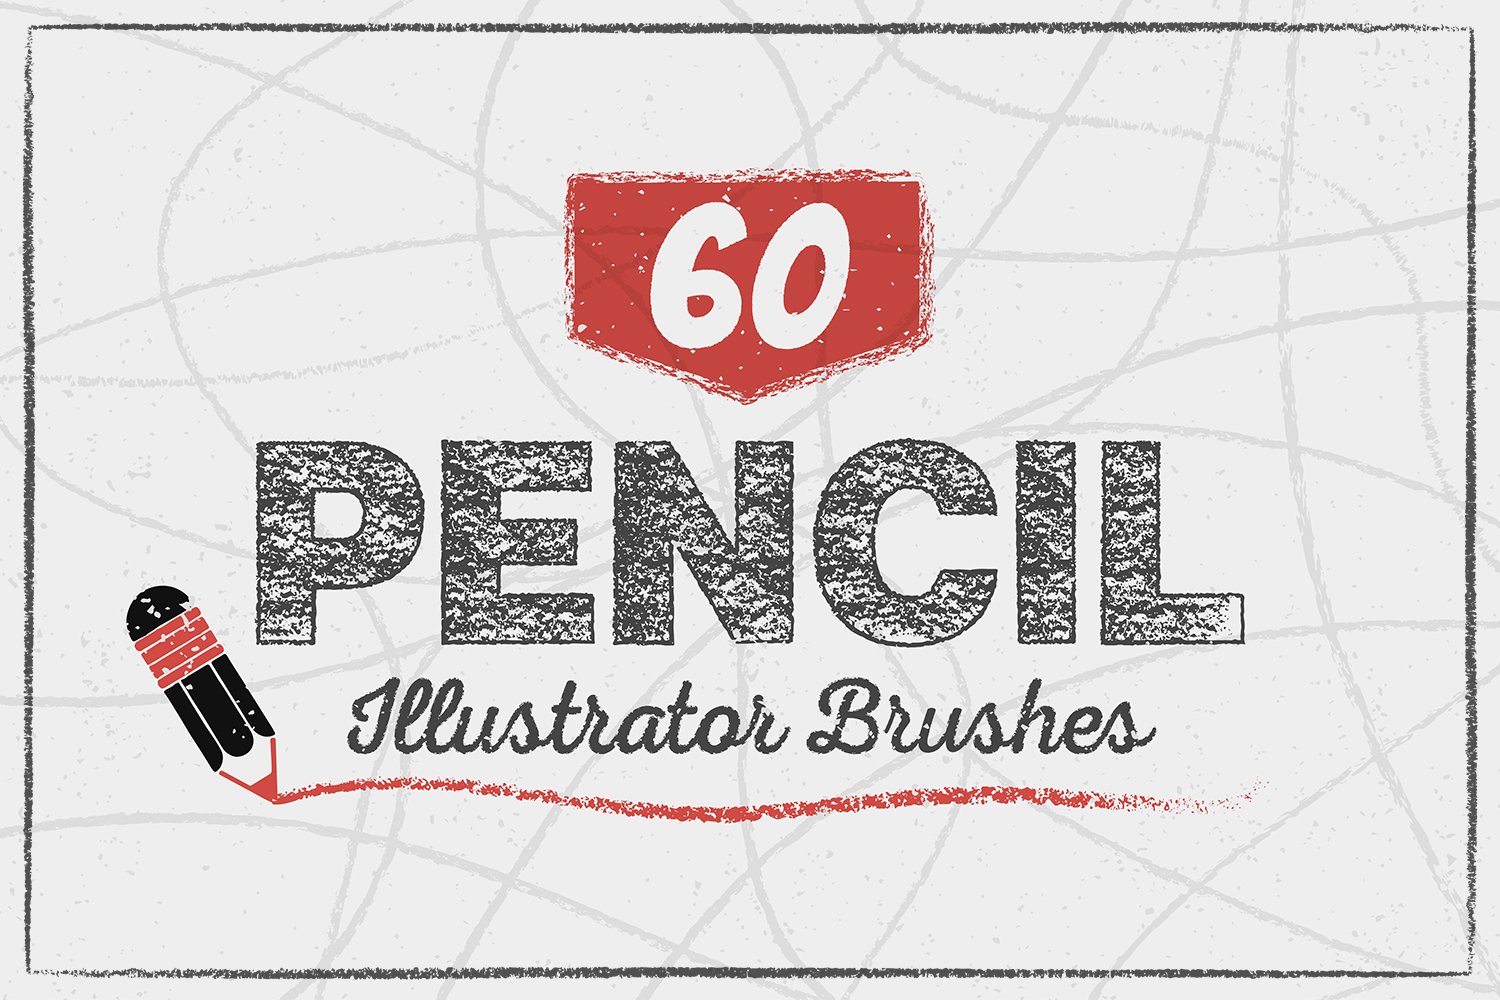 60 Pencil Brushes for Illustrator cover image.